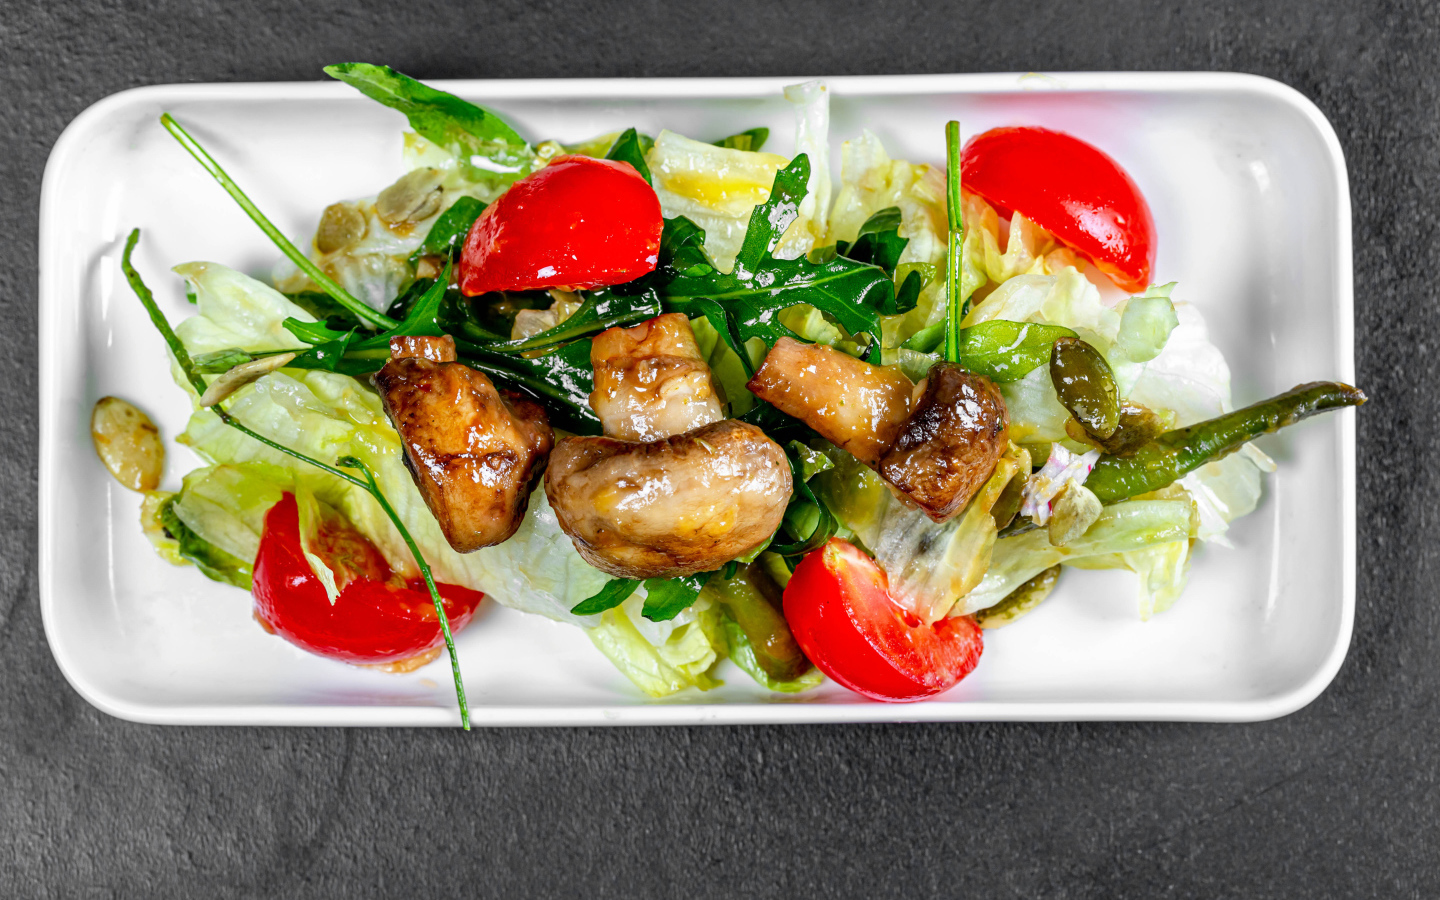 Salad with cabbage, fried mushrooms and tomatoes